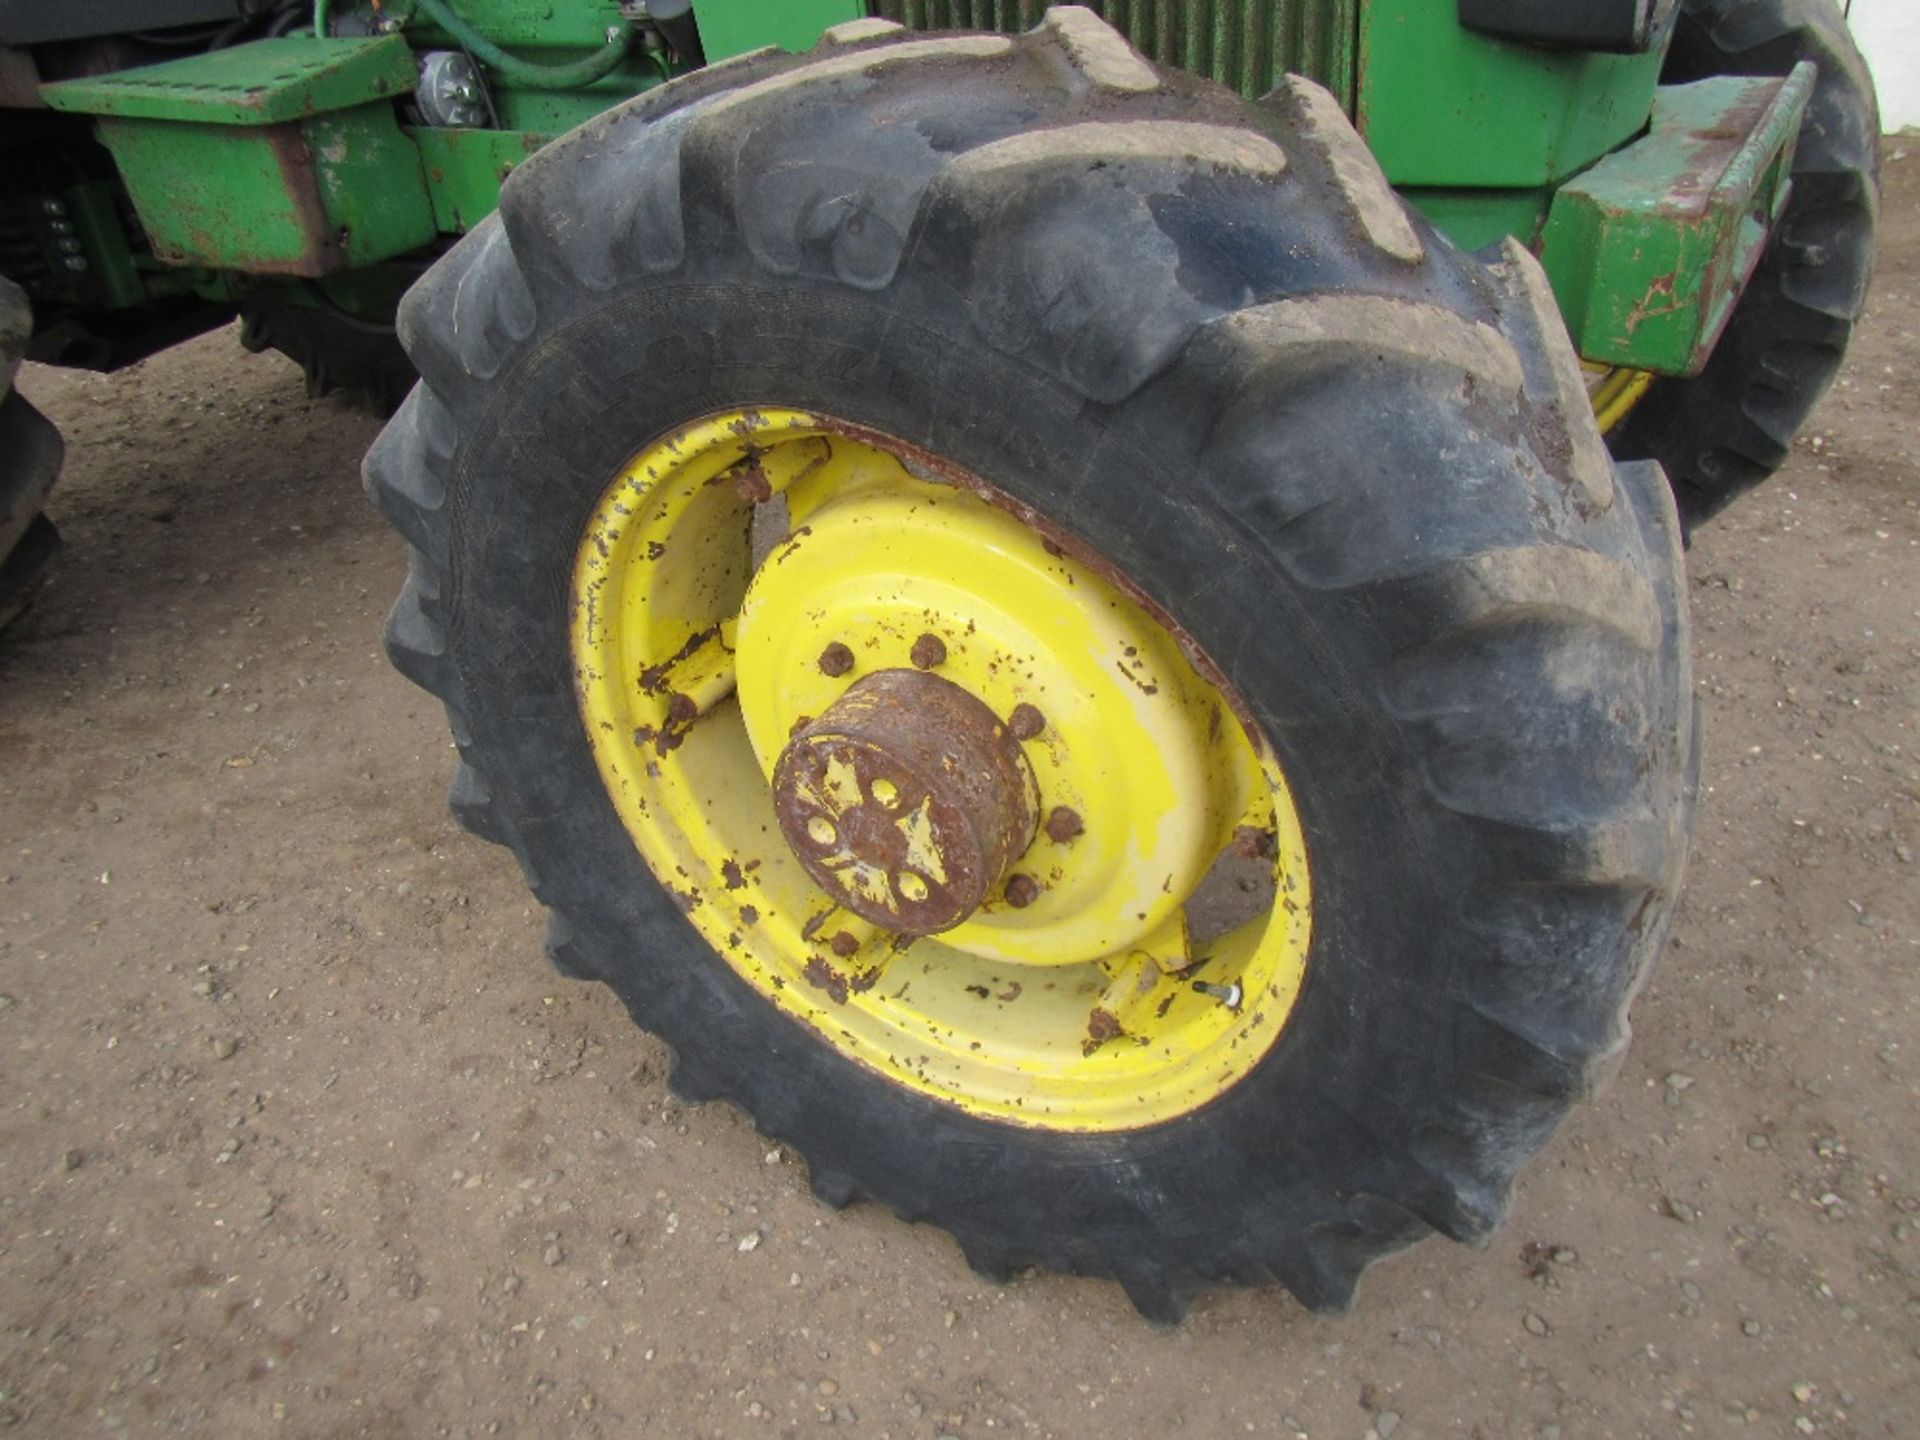 John Deere 3040 4x4 Tractor. Has Been Subject to TOTAL LOSS INSURANCE CLAIM. Reg. No. A122 VFE - Image 4 of 14